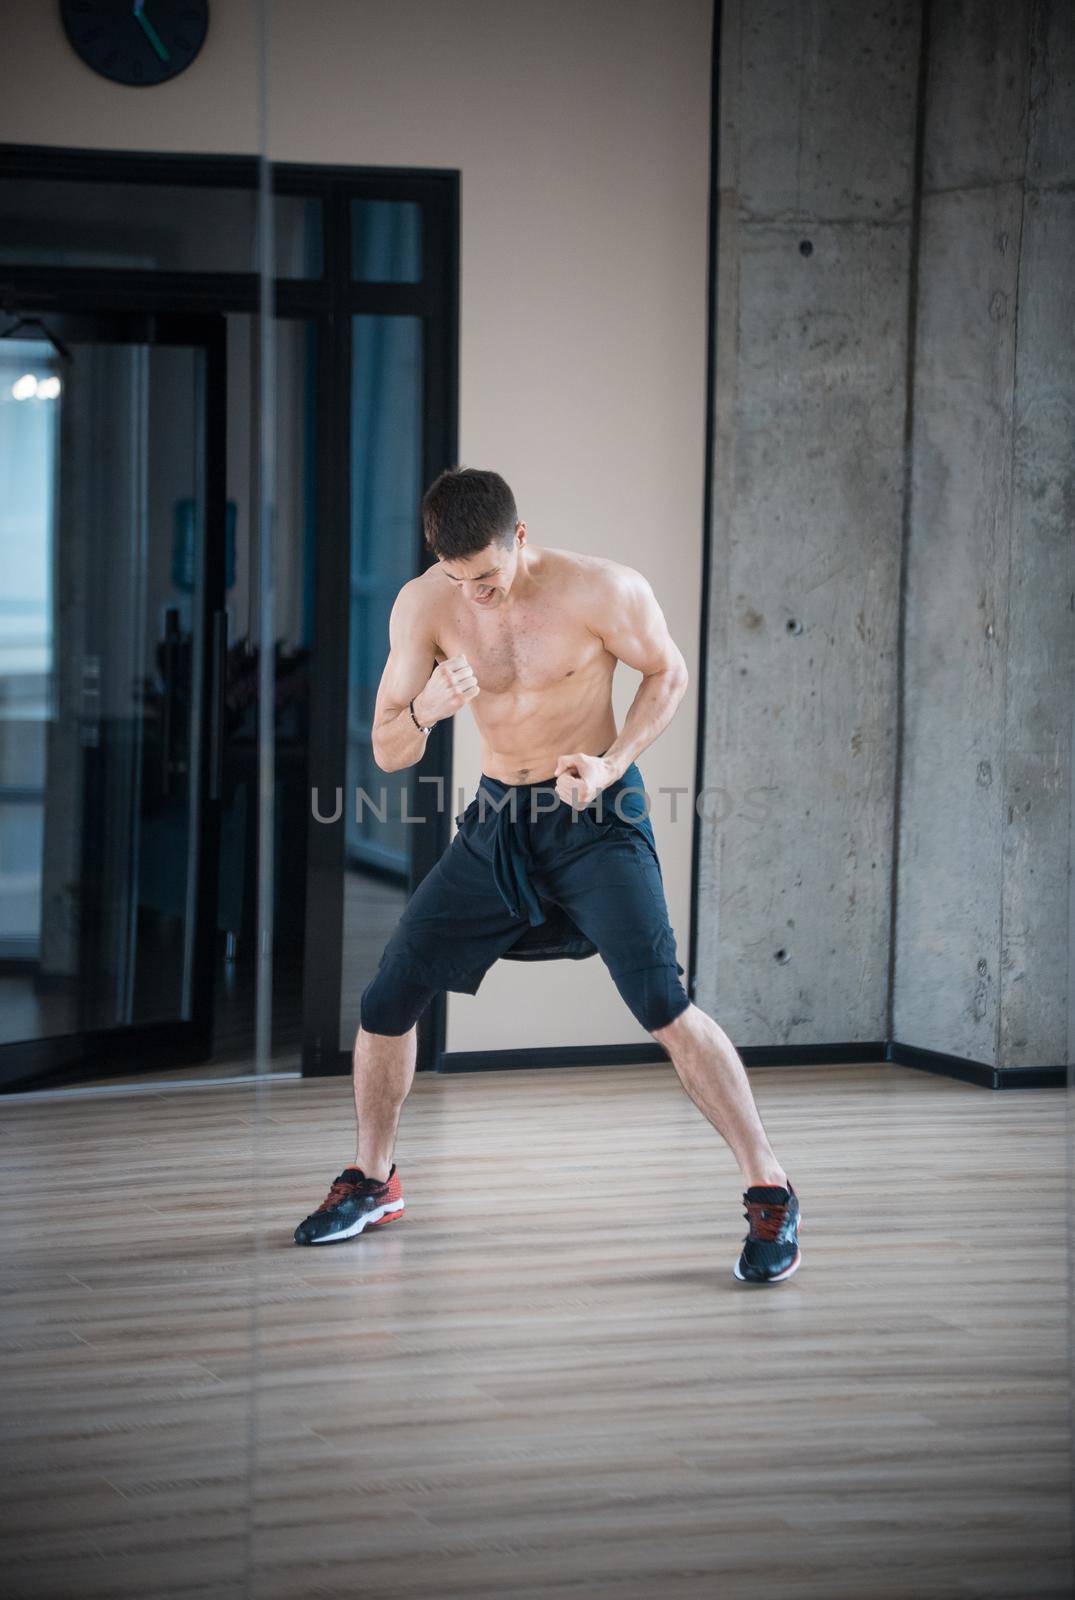 An athletic half naked man boxer training in the studio. Mid shot